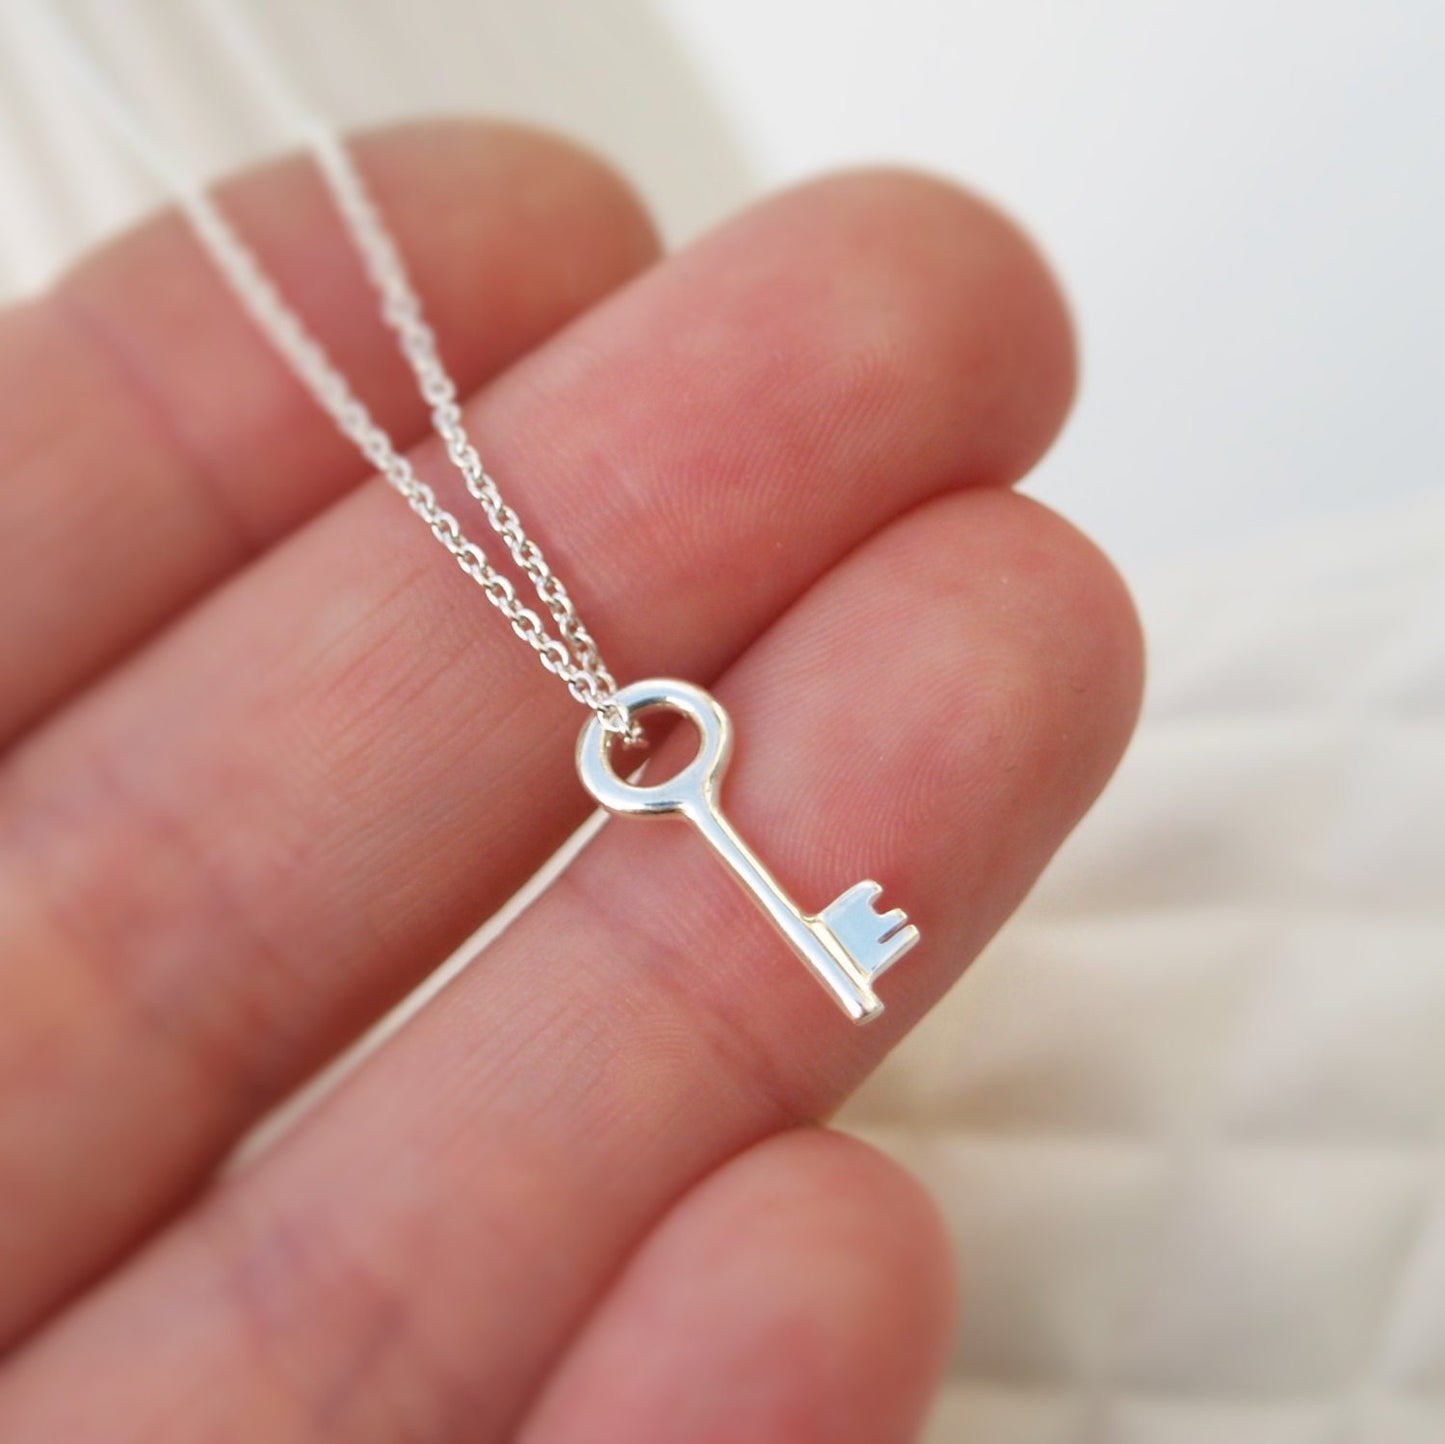 Solid polished silver small and dainty key charm pendant and trace chain